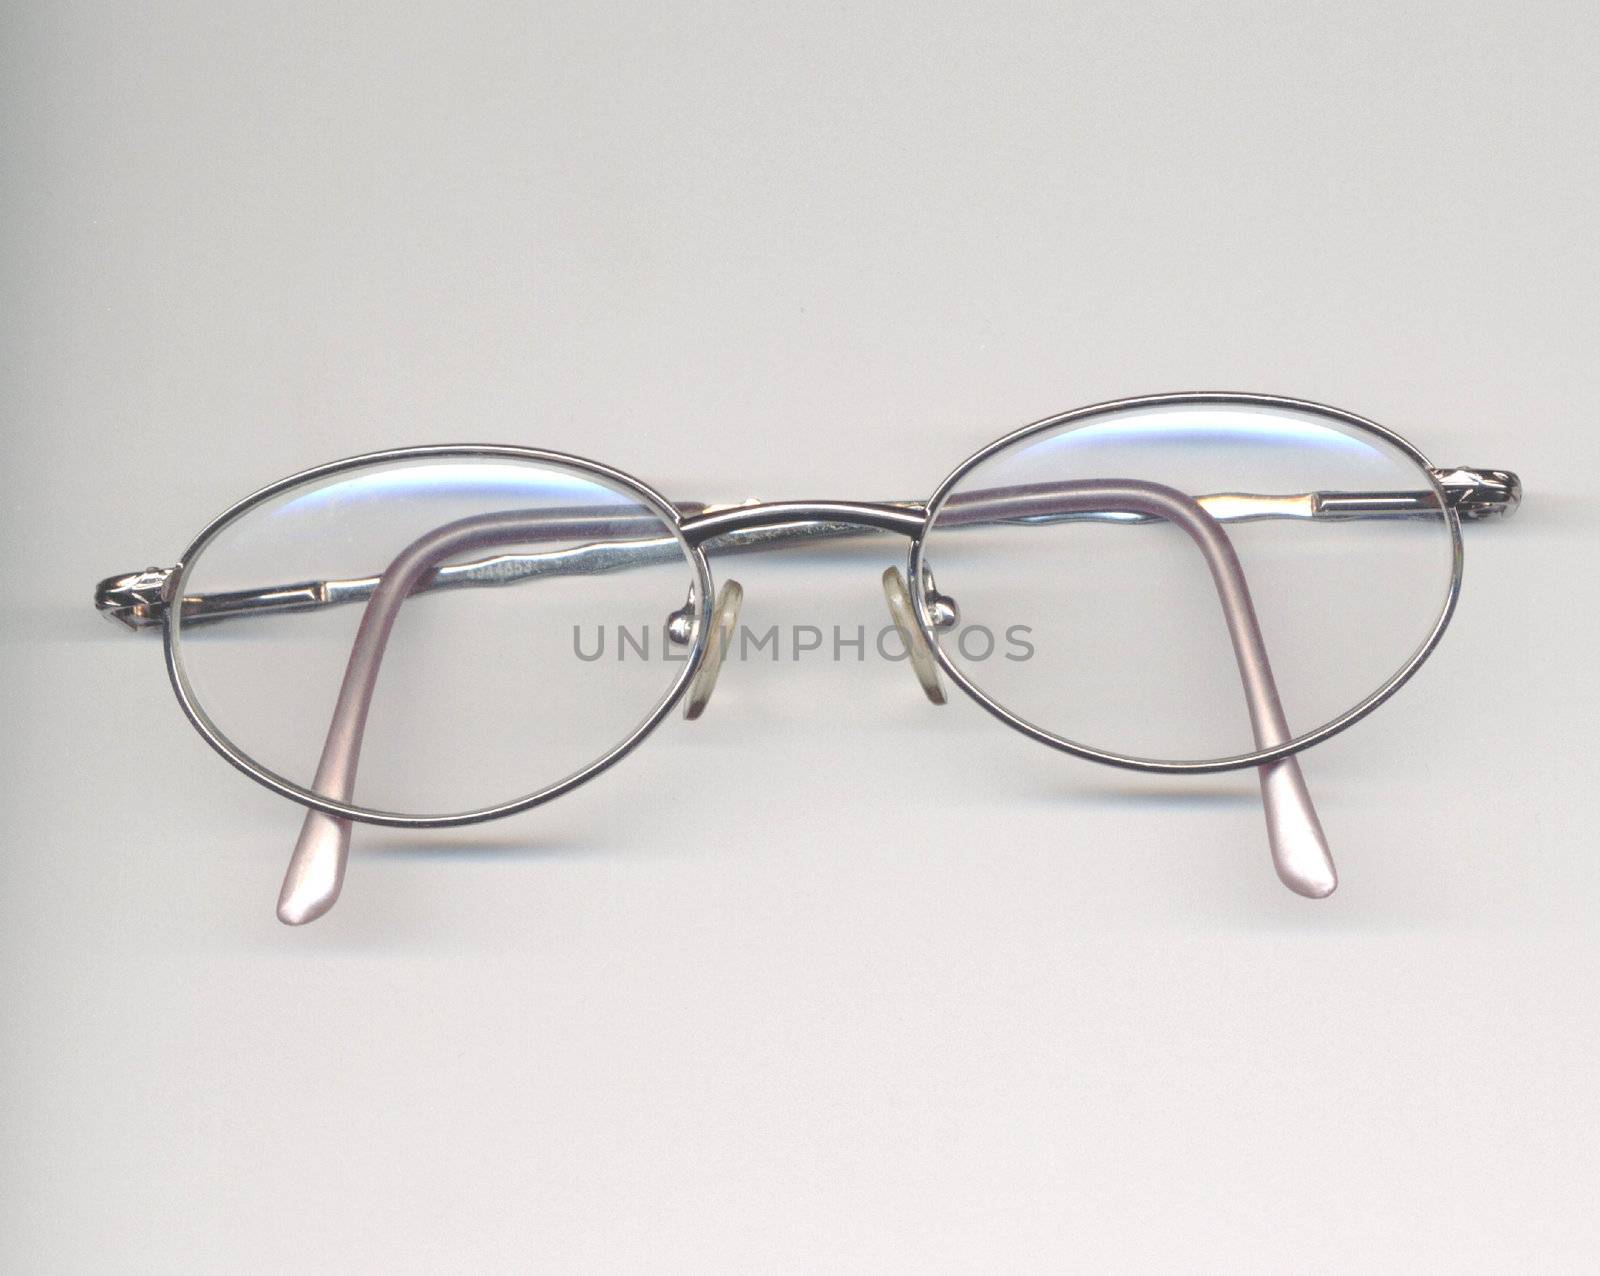 metal rim spectacles over a grey background